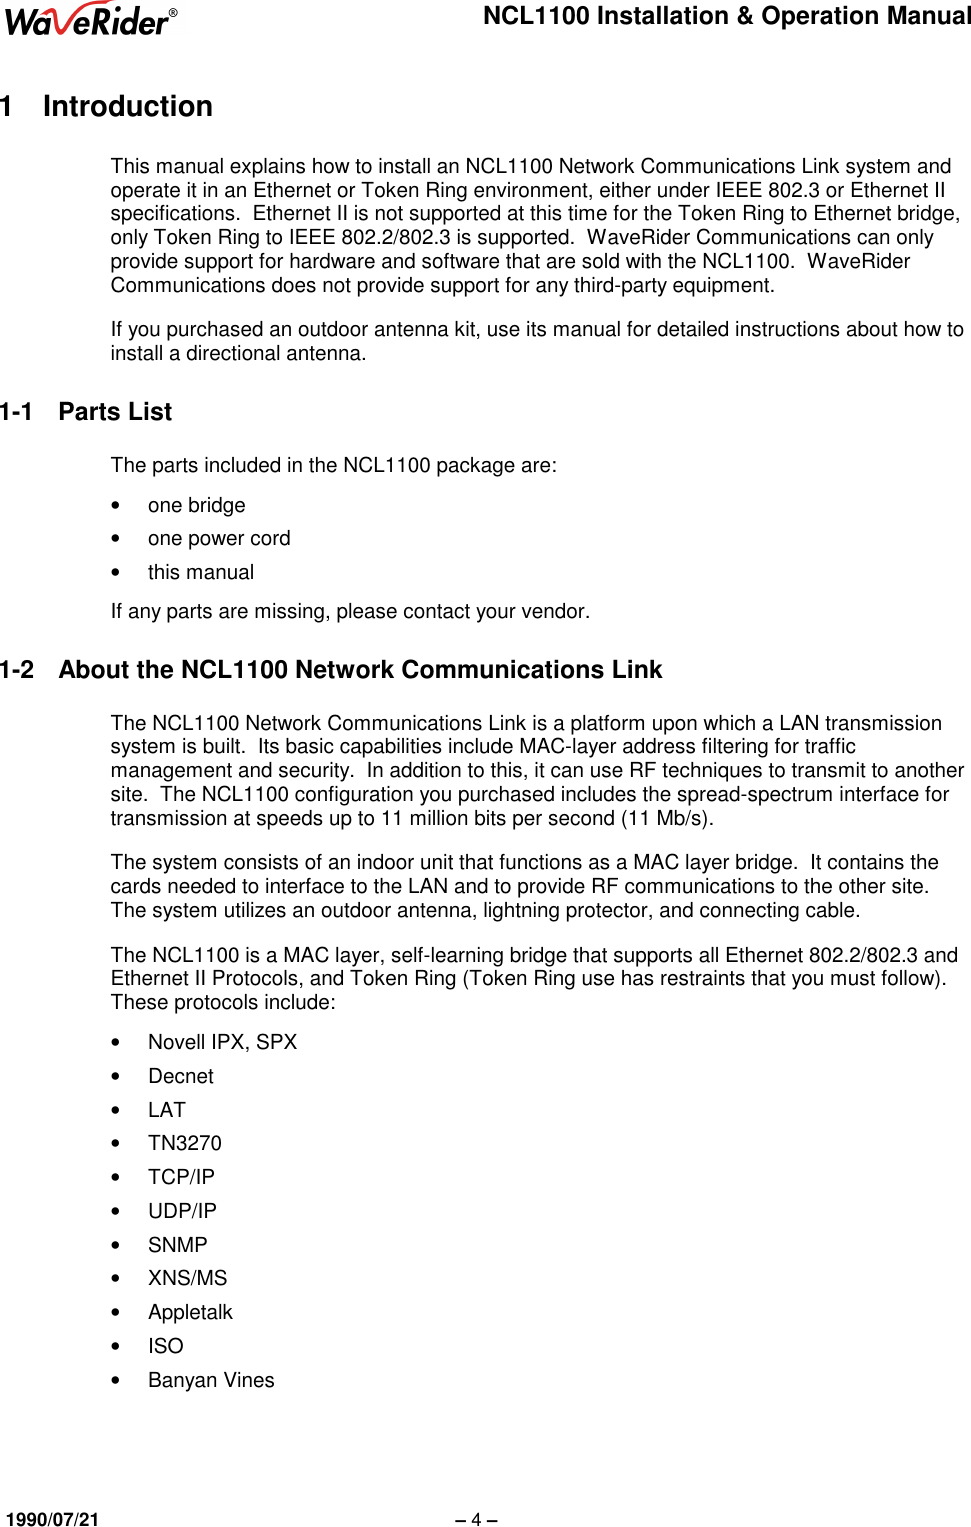 NCL1100 Installation &amp; Operation Manual1990/07/21 – 4 –1 IntroductionThis manual explains how to install an NCL1100 Network Communications Link system andoperate it in an Ethernet or Token Ring environment, either under IEEE 802.3 or Ethernet IIspecifications.  Ethernet II is not supported at this time for the Token Ring to Ethernet bridge,only Token Ring to IEEE 802.2/802.3 is supported.  WaveRider Communications can onlyprovide support for hardware and software that are sold with the NCL1100.  WaveRiderCommunications does not provide support for any third-party equipment.If you purchased an outdoor antenna kit, use its manual for detailed instructions about how toinstall a directional antenna.1-1 Parts ListThe parts included in the NCL1100 package are:• one bridge•  one power cord• this manualIf any parts are missing, please contact your vendor.1-2  About the NCL1100 Network Communications LinkThe NCL1100 Network Communications Link is a platform upon which a LAN transmissionsystem is built.  Its basic capabilities include MAC-layer address filtering for trafficmanagement and security.  In addition to this, it can use RF techniques to transmit to anothersite.  The NCL1100 configuration you purchased includes the spread-spectrum interface fortransmission at speeds up to 11 million bits per second (11 Mb/s).The system consists of an indoor unit that functions as a MAC layer bridge.  It contains thecards needed to interface to the LAN and to provide RF communications to the other site.The system utilizes an outdoor antenna, lightning protector, and connecting cable.The NCL1100 is a MAC layer, self-learning bridge that supports all Ethernet 802.2/802.3 andEthernet II Protocols, and Token Ring (Token Ring use has restraints that you must follow).These protocols include:•  Novell IPX, SPX• Decnet• LAT• TN3270• TCP/IP• UDP/IP• SNMP• XNS/MS• Appletalk• ISO• Banyan Vines